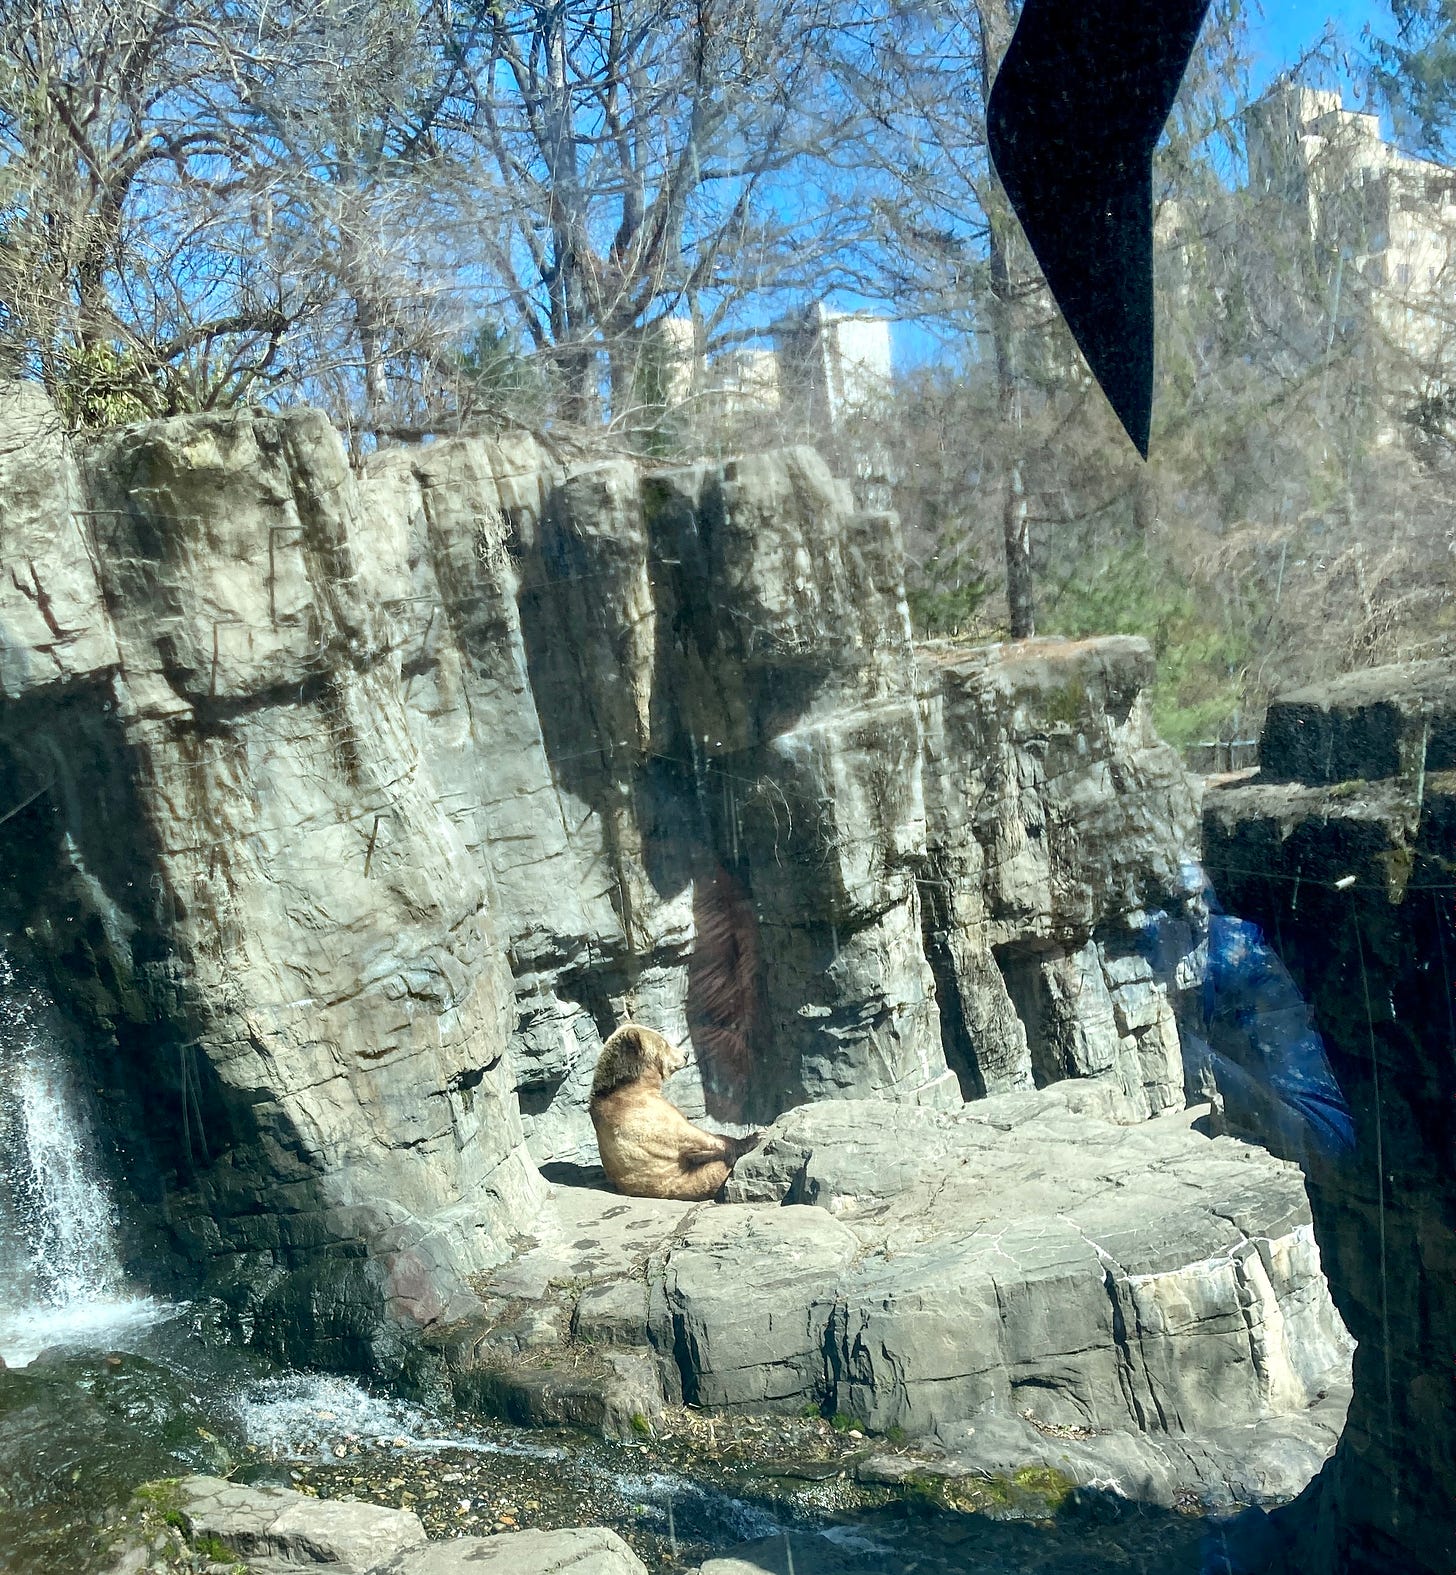 bear sitting upright on a rock with a cityscape and blue sky in the background